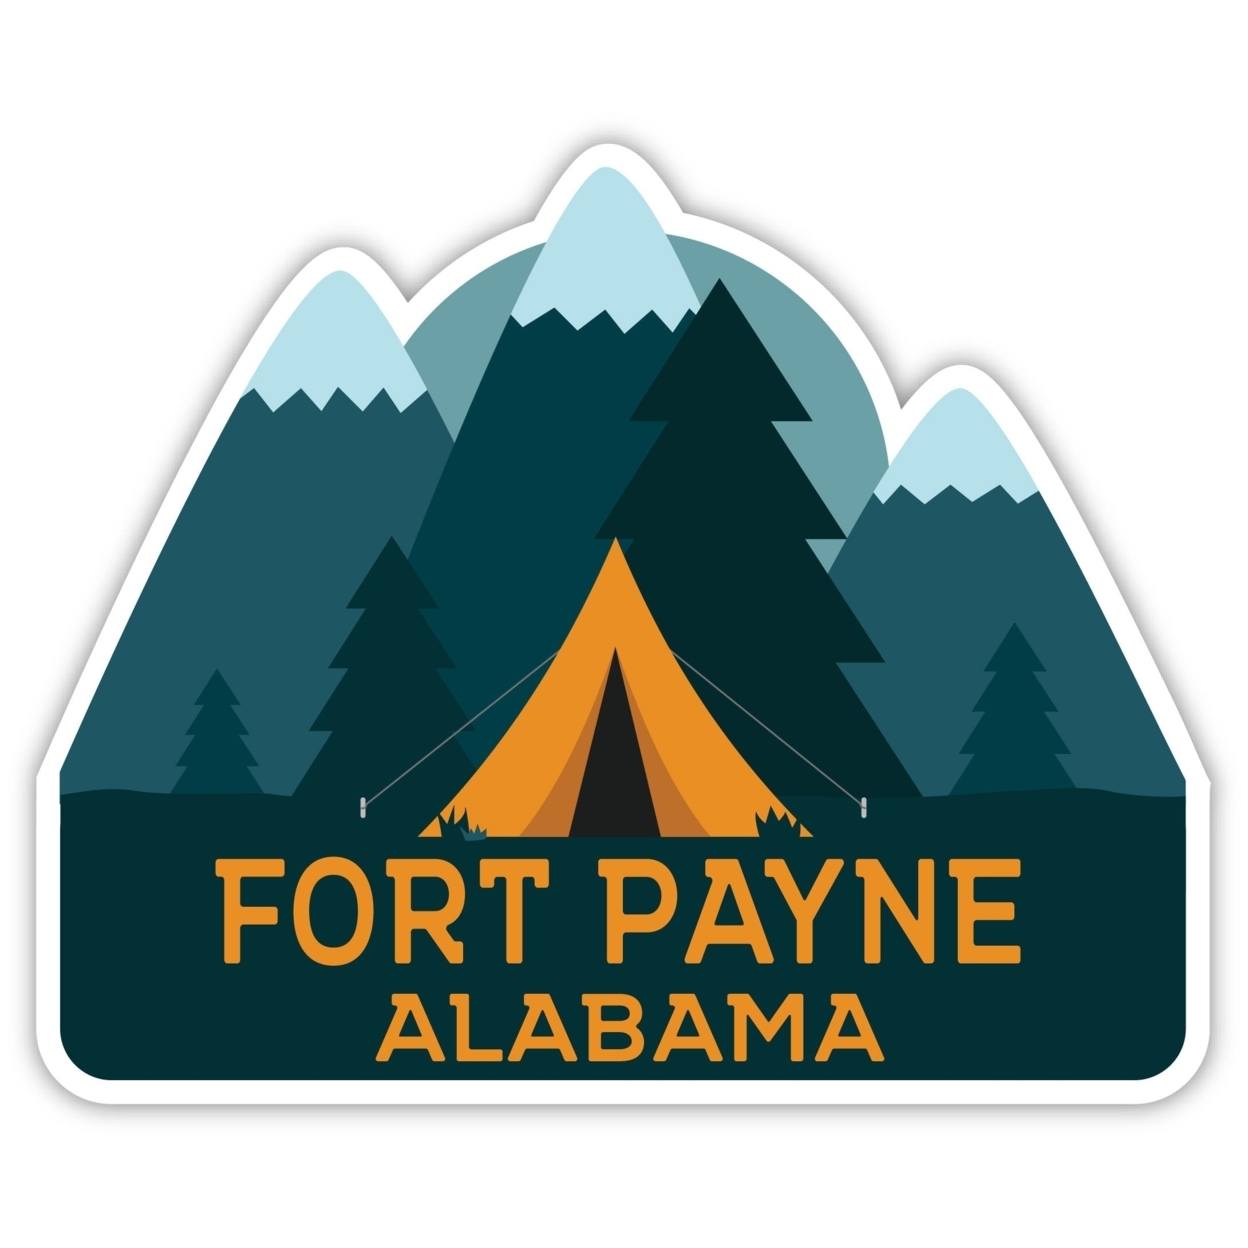 Fort Payne Alabama Souvenir Decorative Stickers (Choose Theme And Size) - 4-Pack, 6-Inch, Camp Life